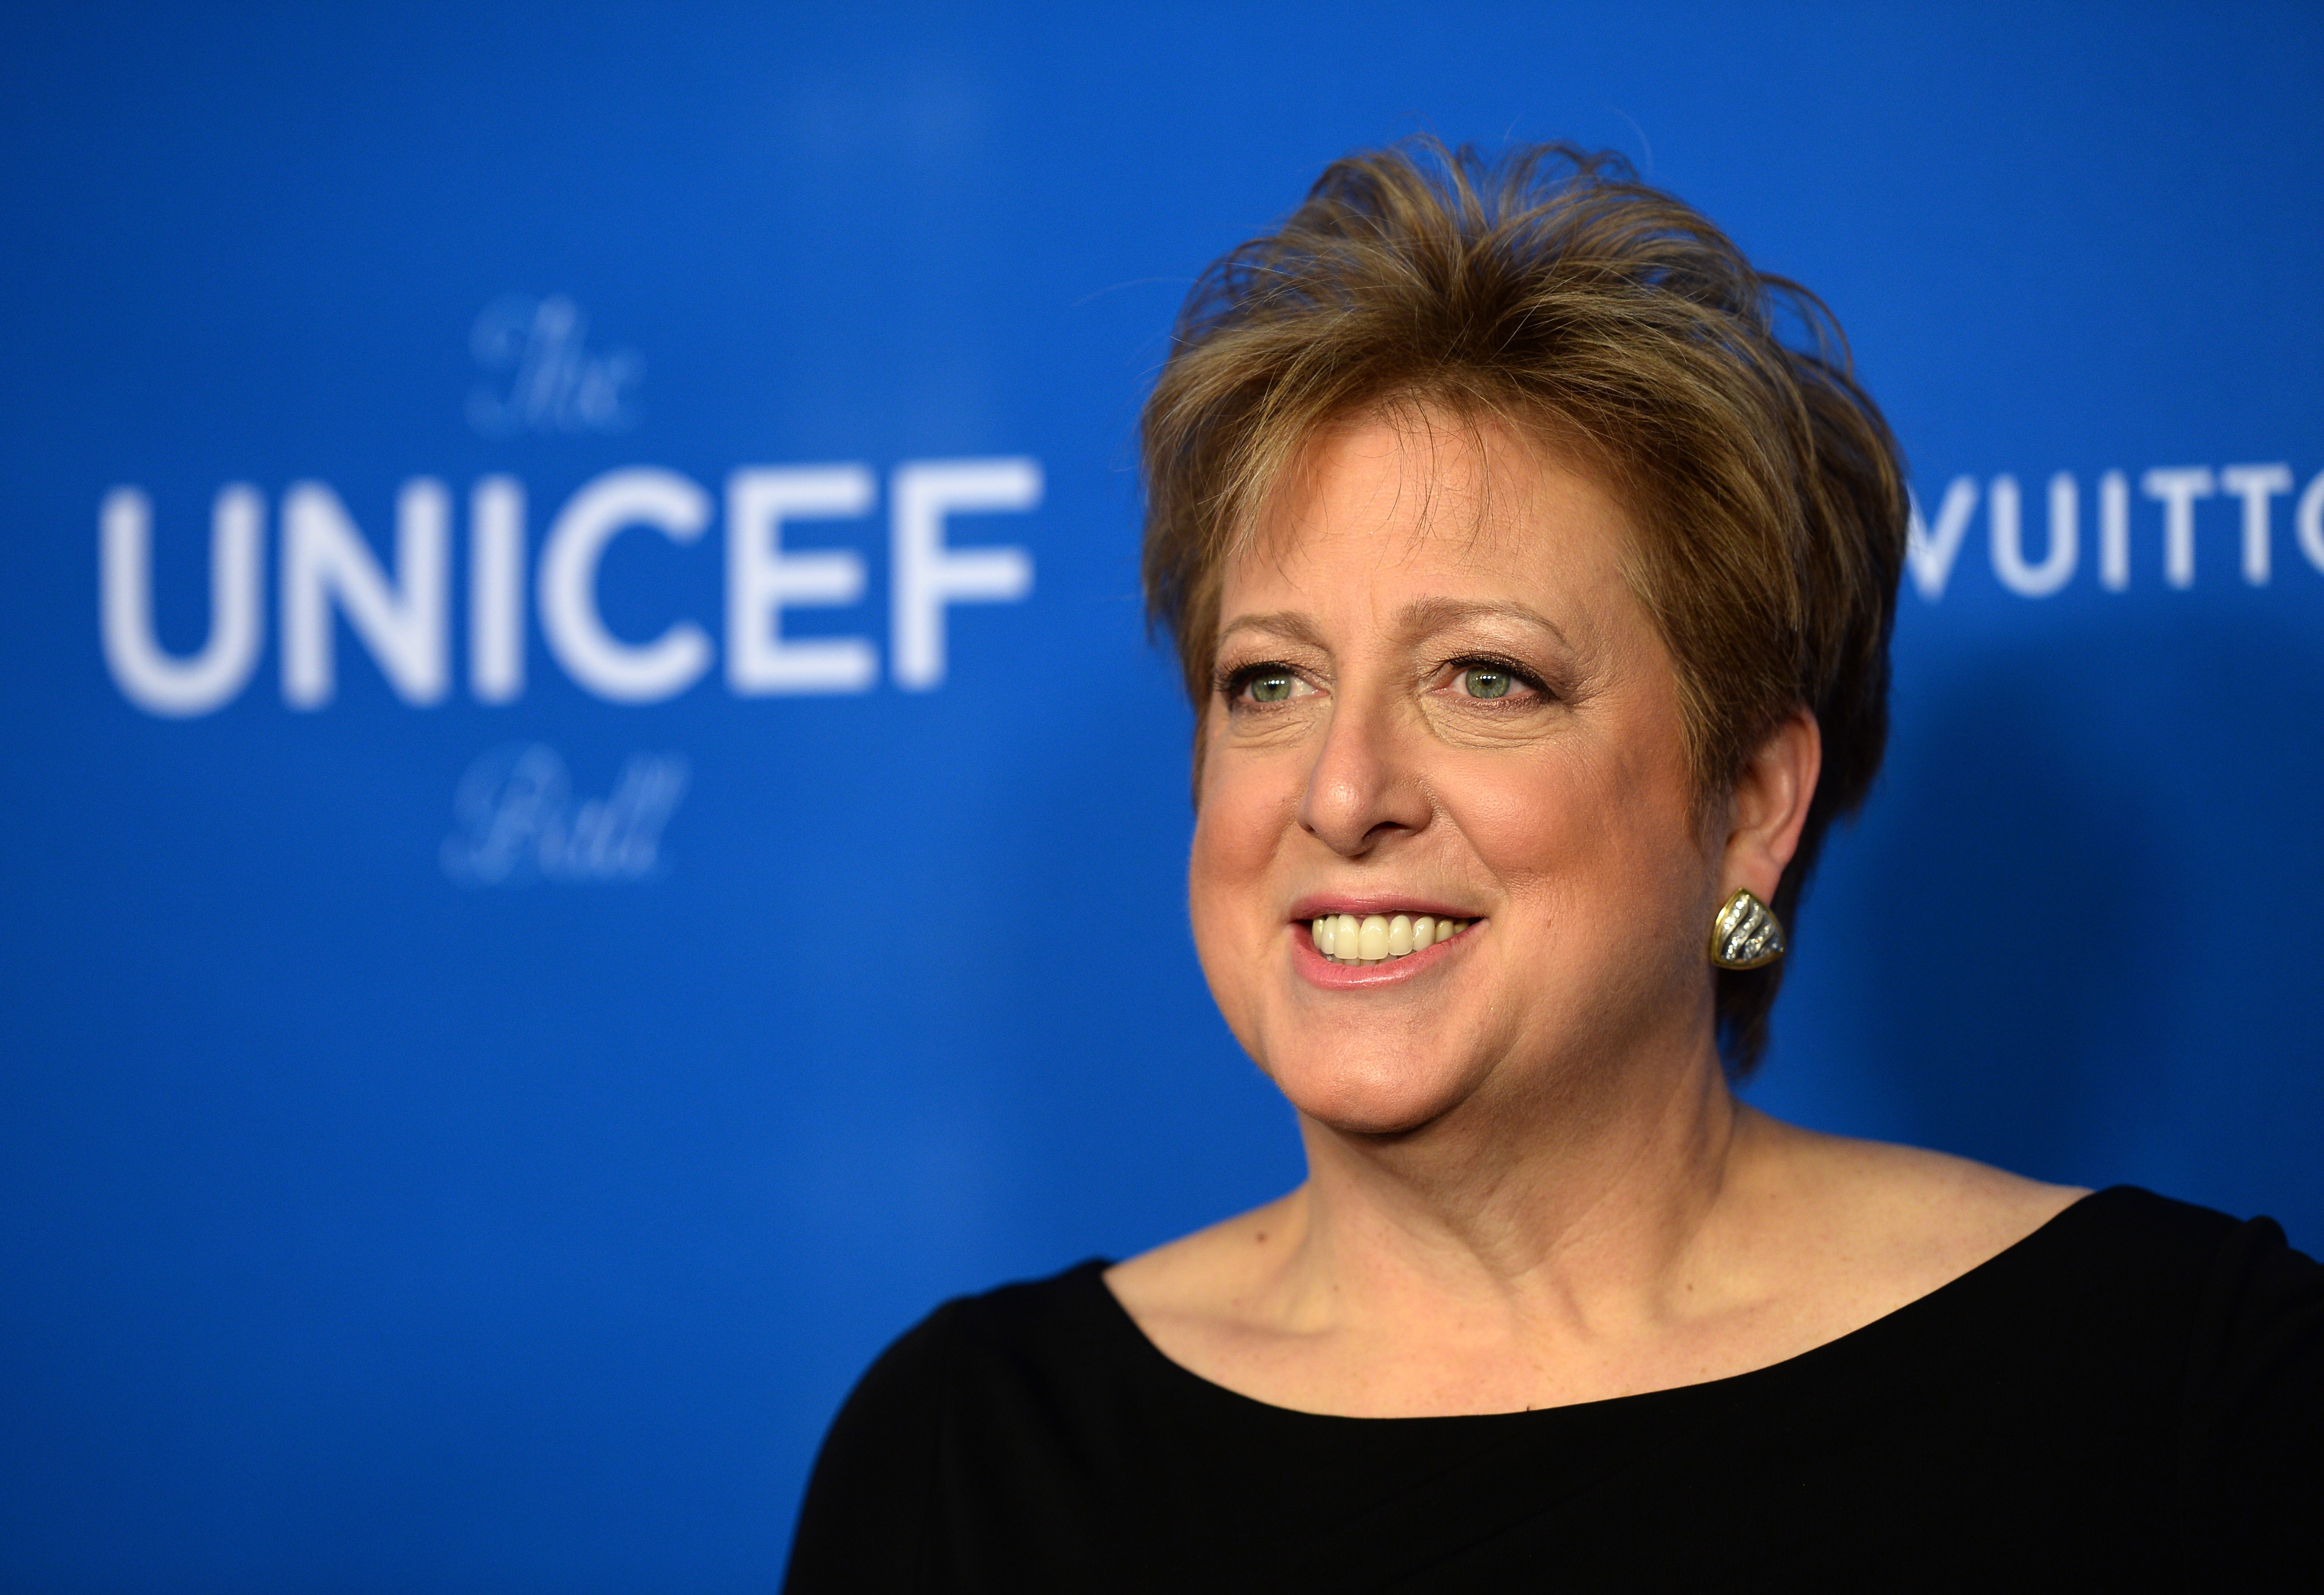 President and CEO U.S. Fund for UNICEF Caryl M. Stern arrives at the 6th Biennial UNICEF Ball at the Beverly Wilshire Four Seasons Hotel on in Beverly Hills, Calif., on Jan. 12, 2016.